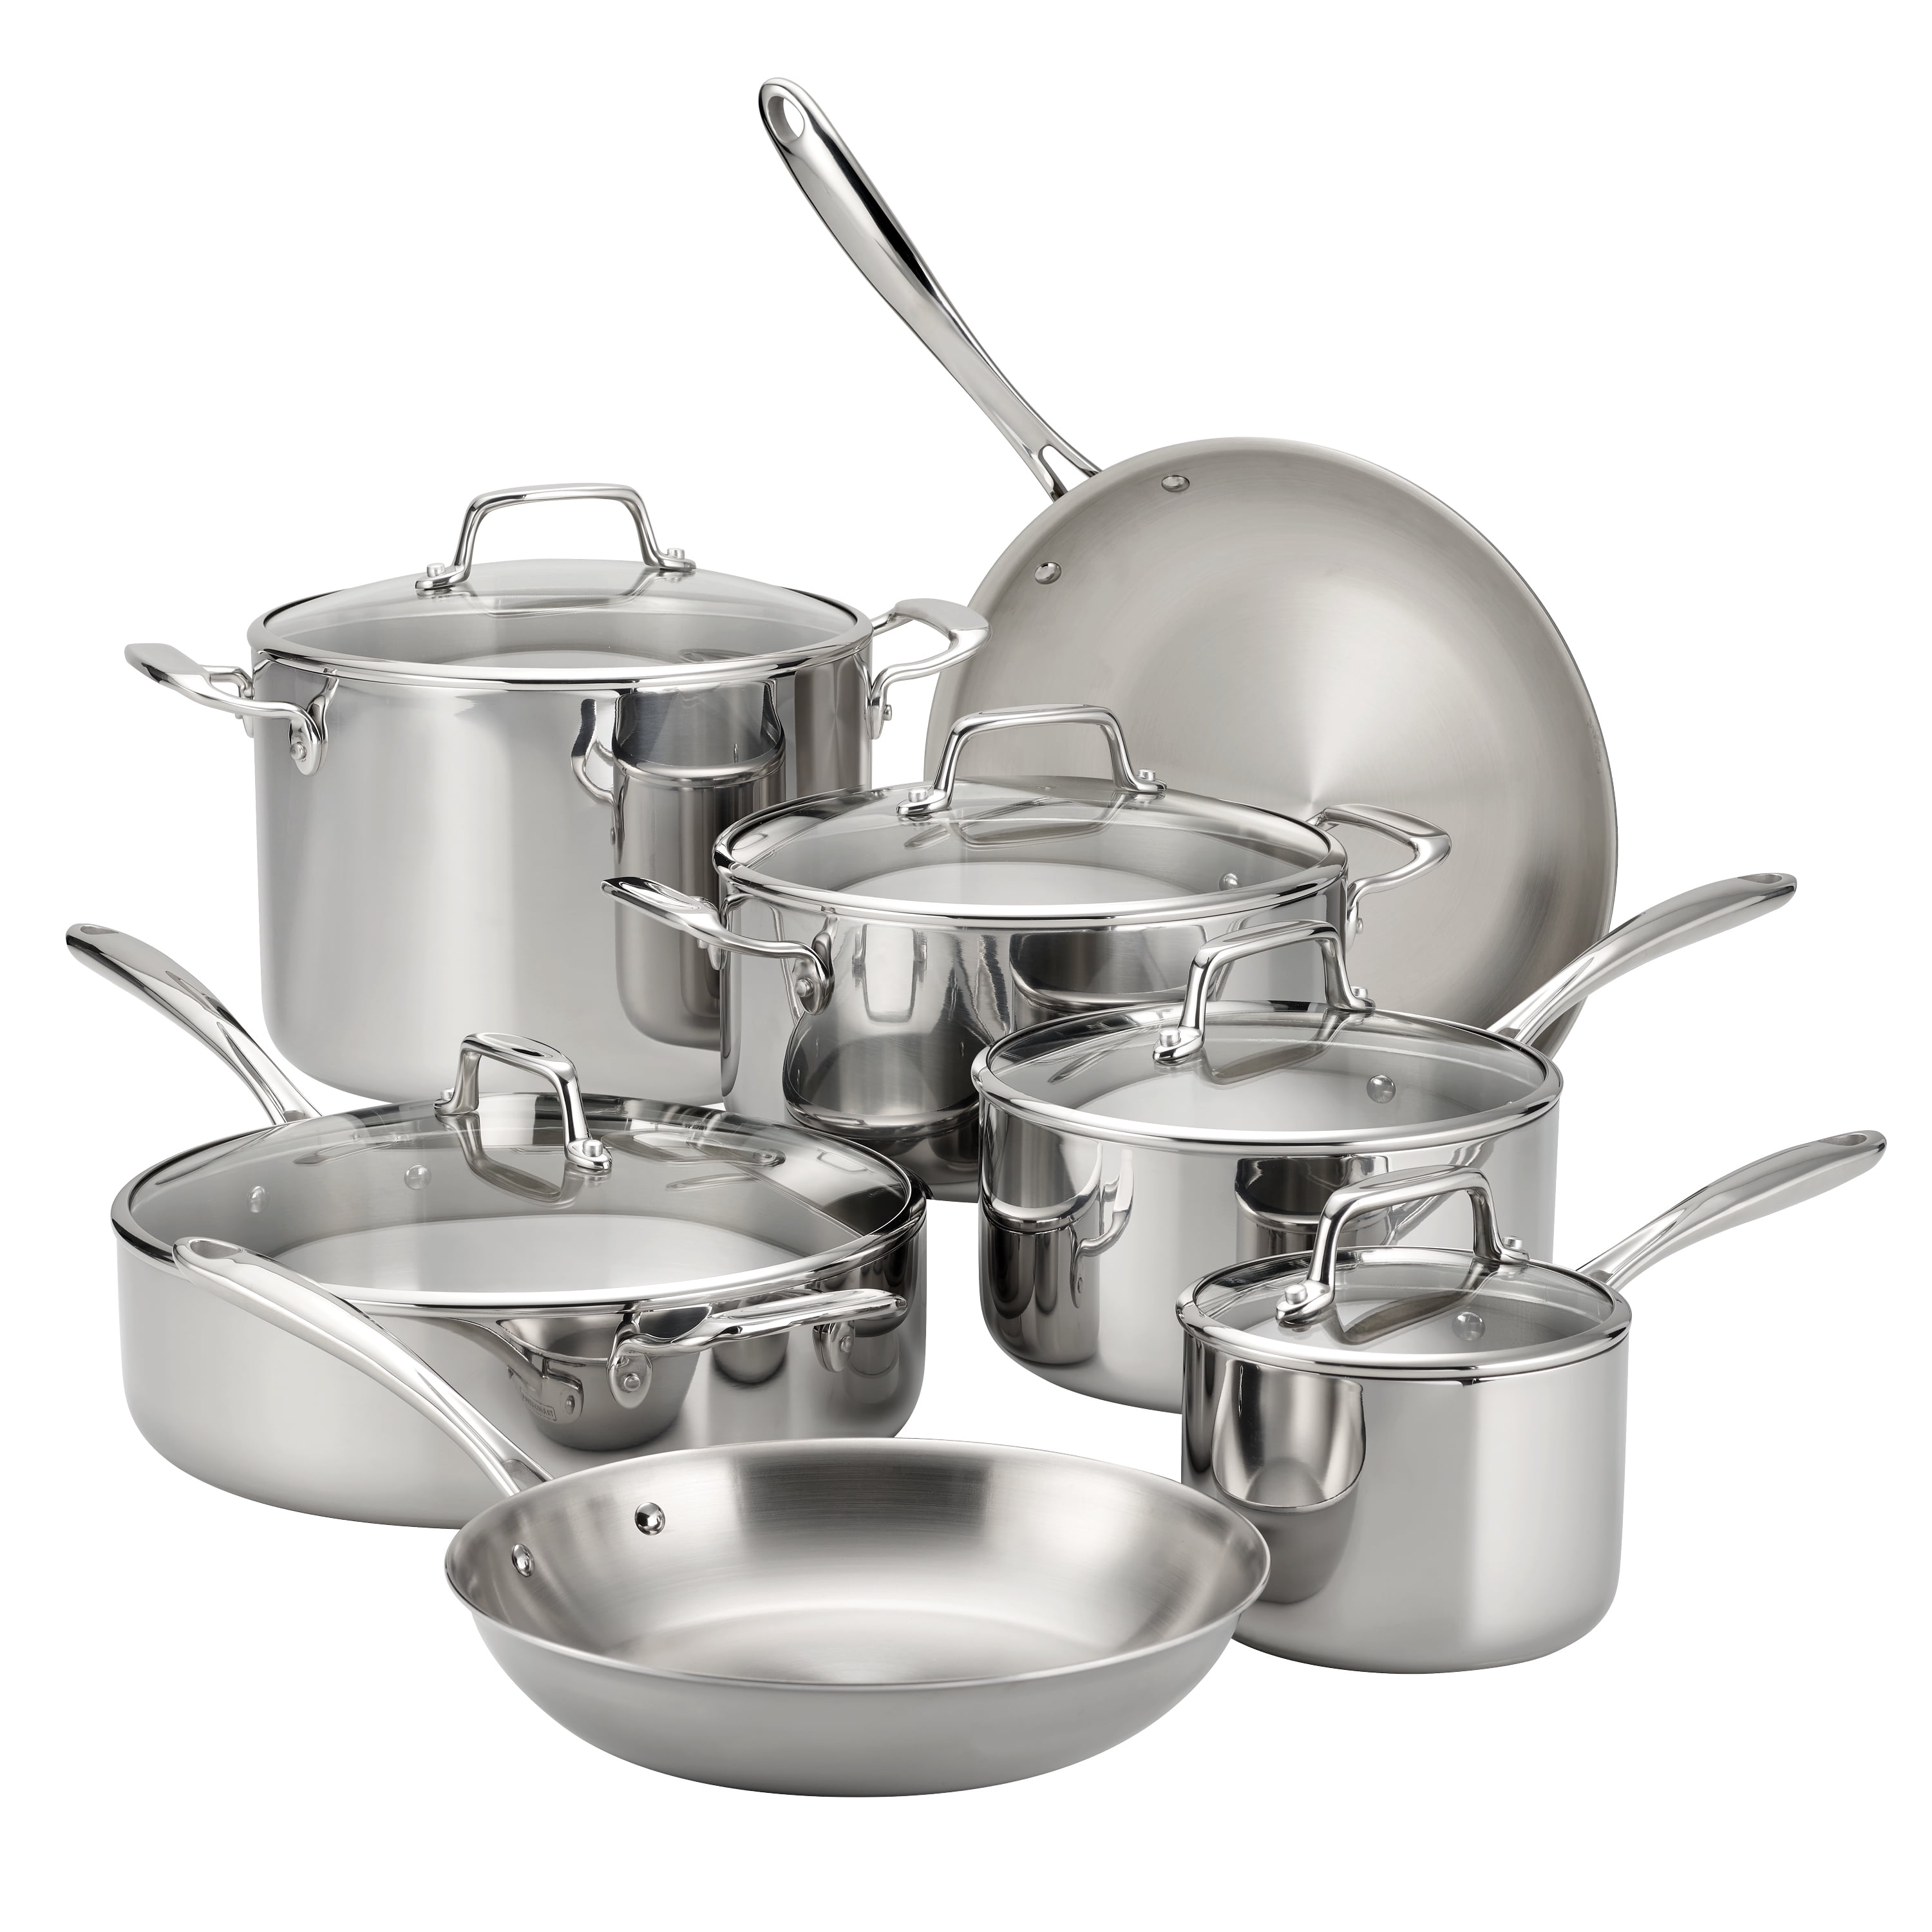 Tramontina 12-Piece Tri-Ply Clad Stainless Steel Cookware Set, with Tramontina 12 Piece Tri Ply Clad Stainless Steel Cookware Set